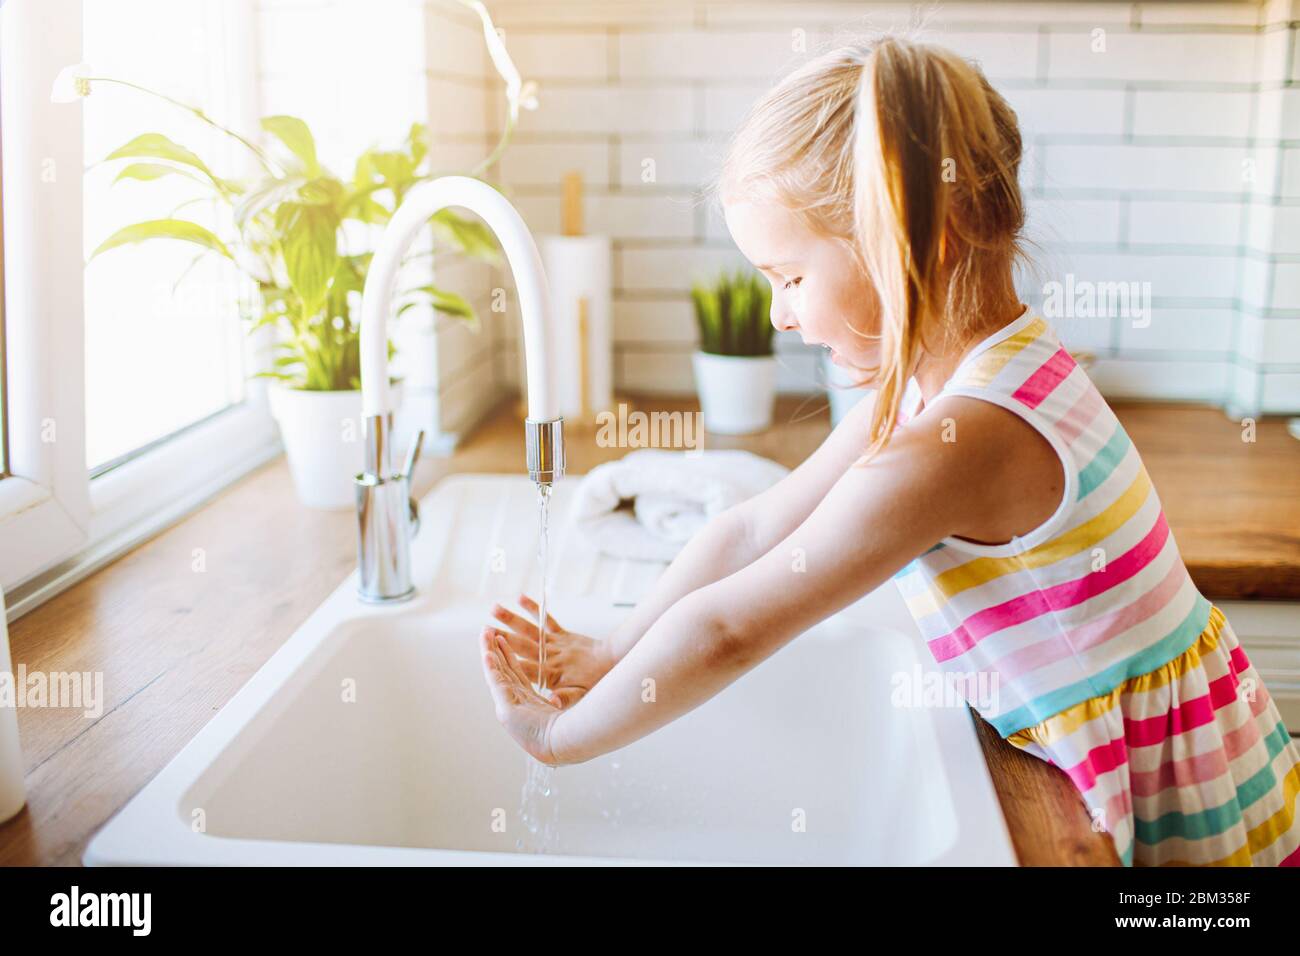 Blonde toddler girl washing hands in the lingh kitchen before eating. Hygiene and healthcare concept Stock Photo